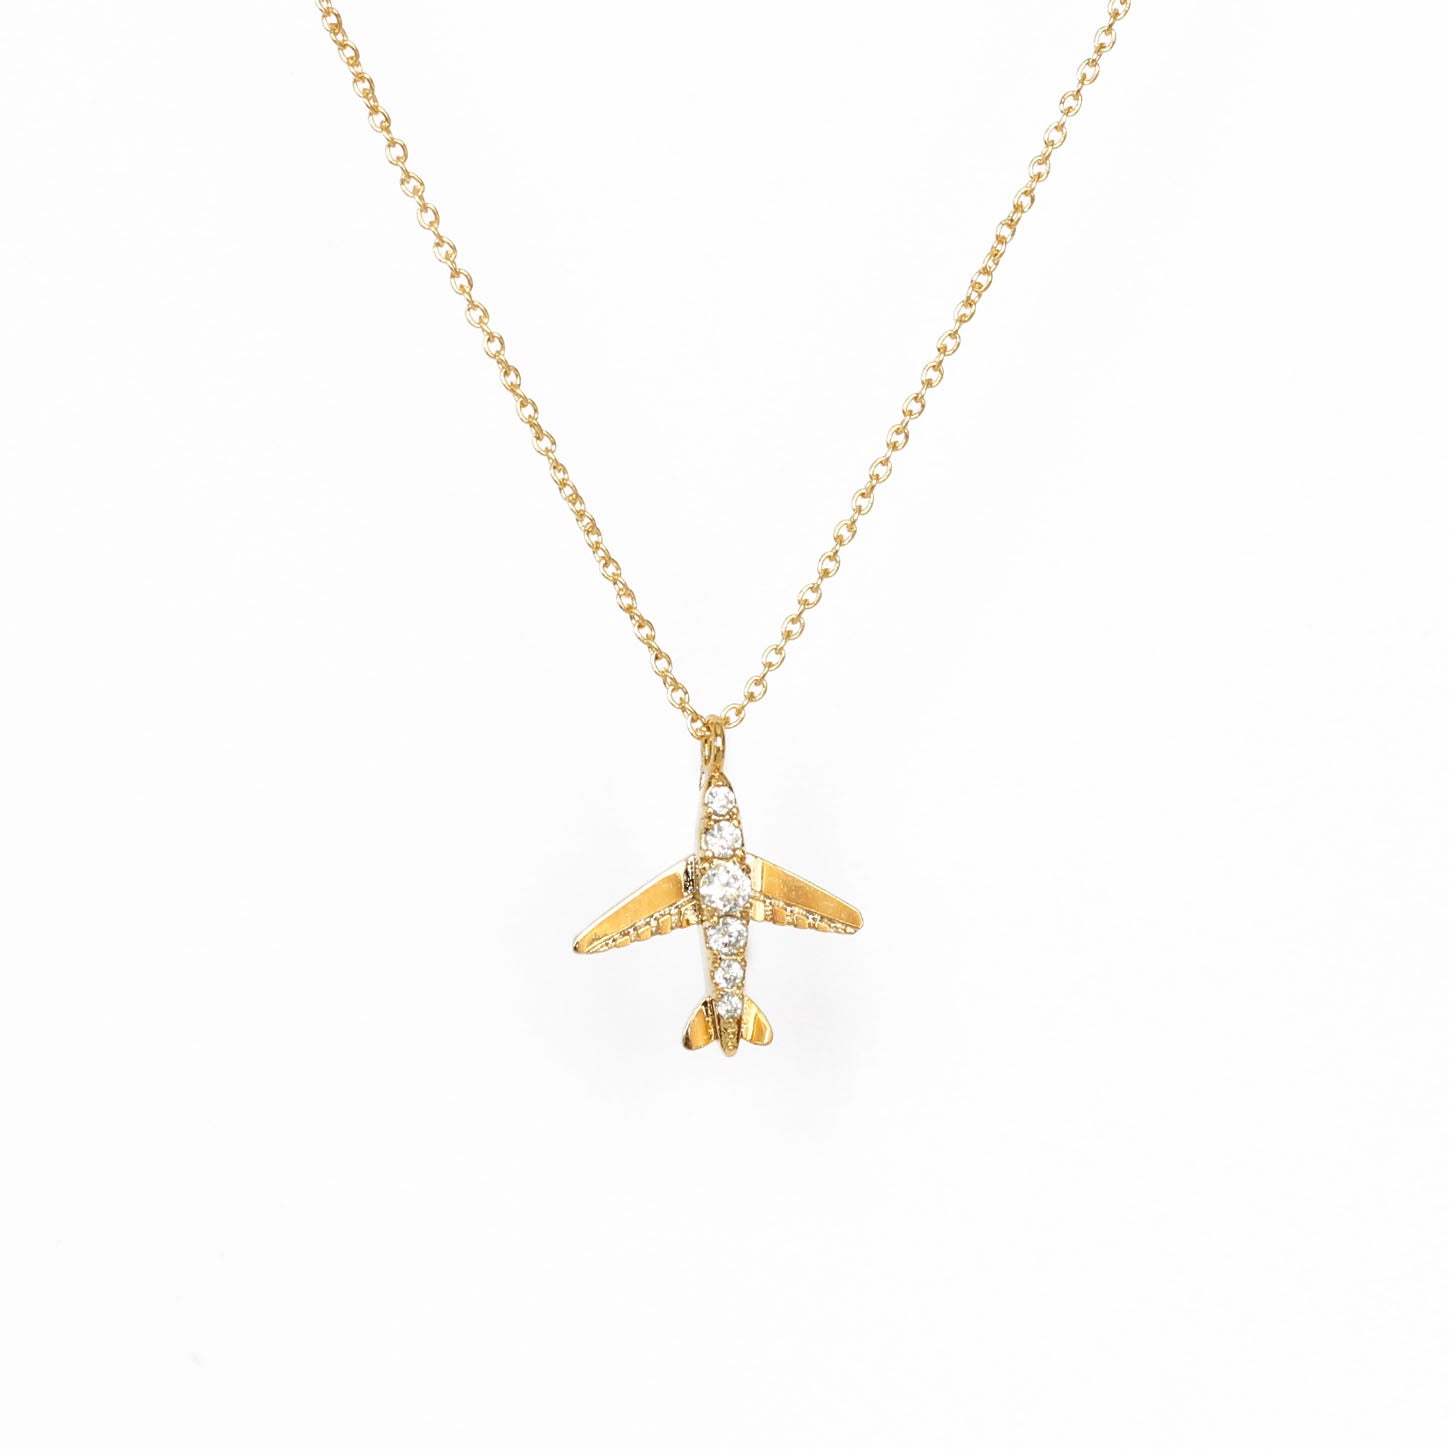 A perfect anniversary or special occasion gift for women, this handmade airplane necklace is a beautiful and unique accessory. Great for aviation enthusiasts, it's versatile and can be worn dressed up or down. A thoughtful gift for any woman in your life.